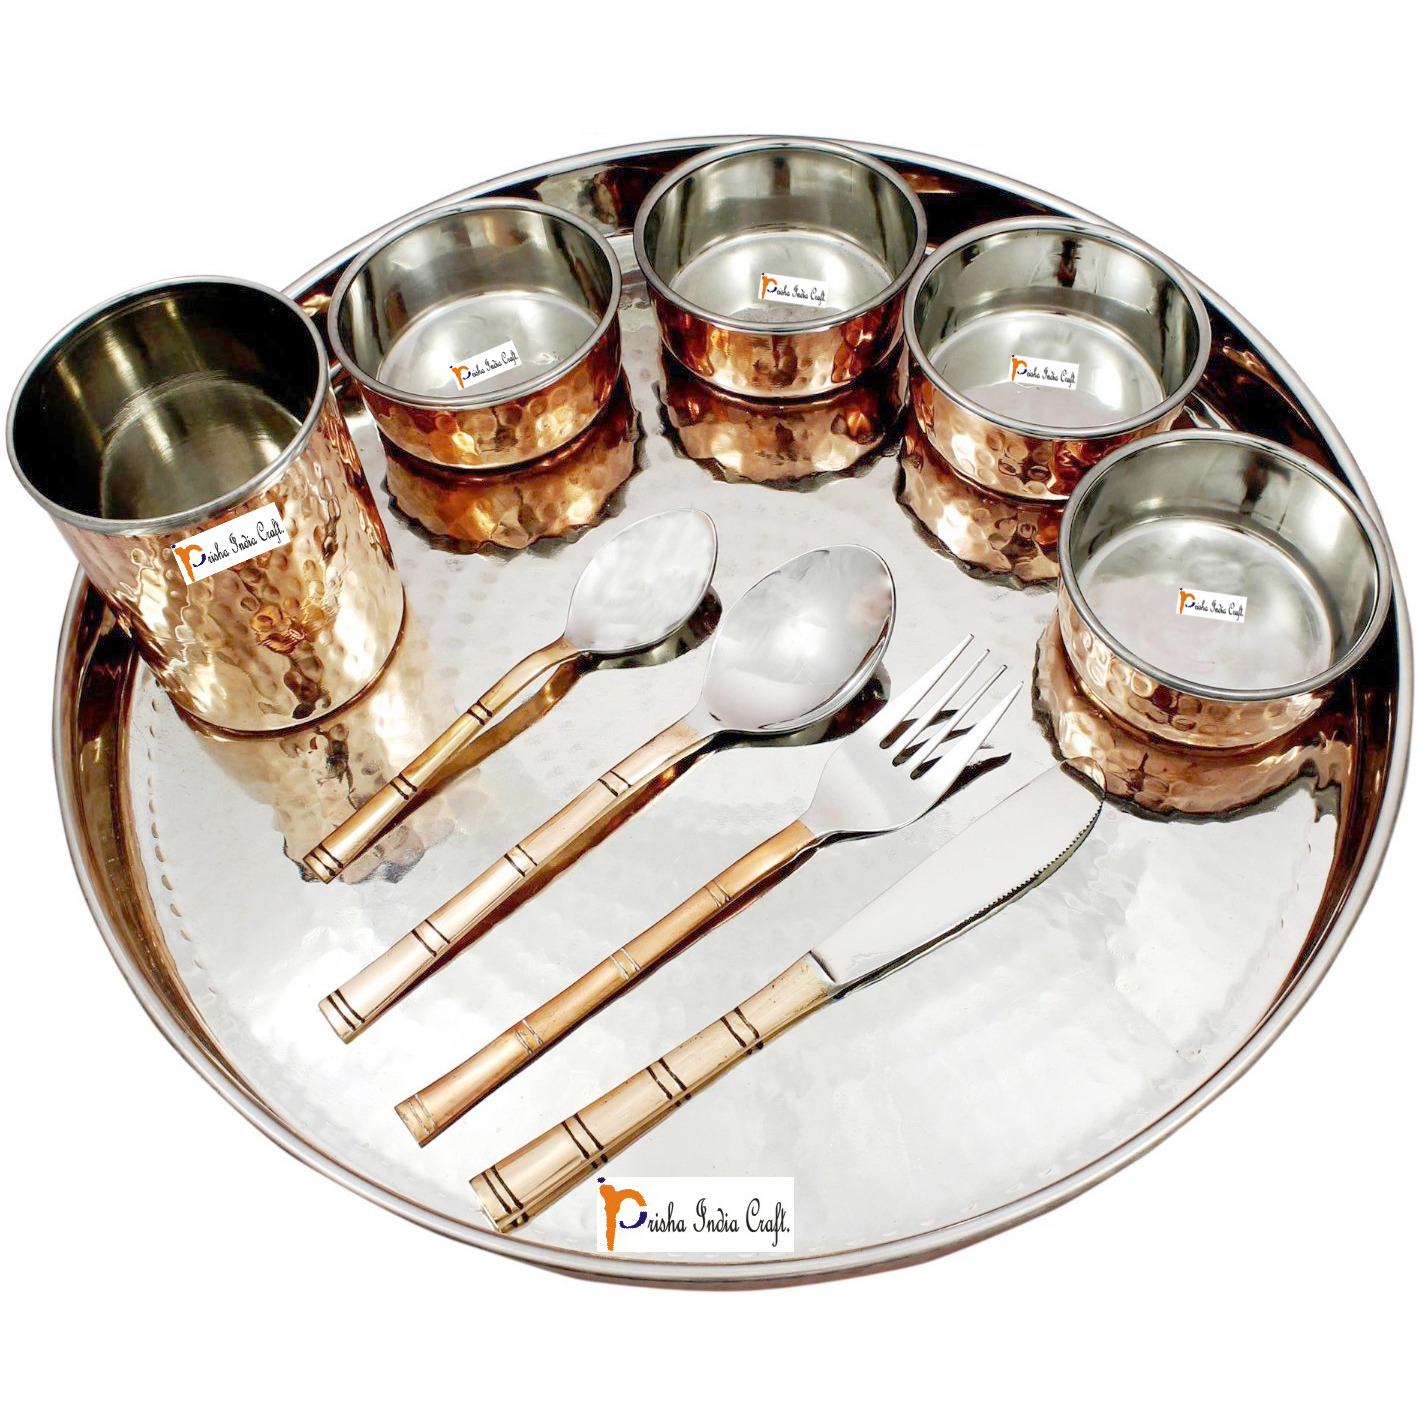 Prisha India Craft B. Set of 3 Dinnerware Traditional Stainless Steel Copper Dinner Set of Thali Plate, Bowls, Glass and Spoons, Dia 13  With 1 Luxury Style Stainless Steel Copper Pitcher Jug - Christmas Gift